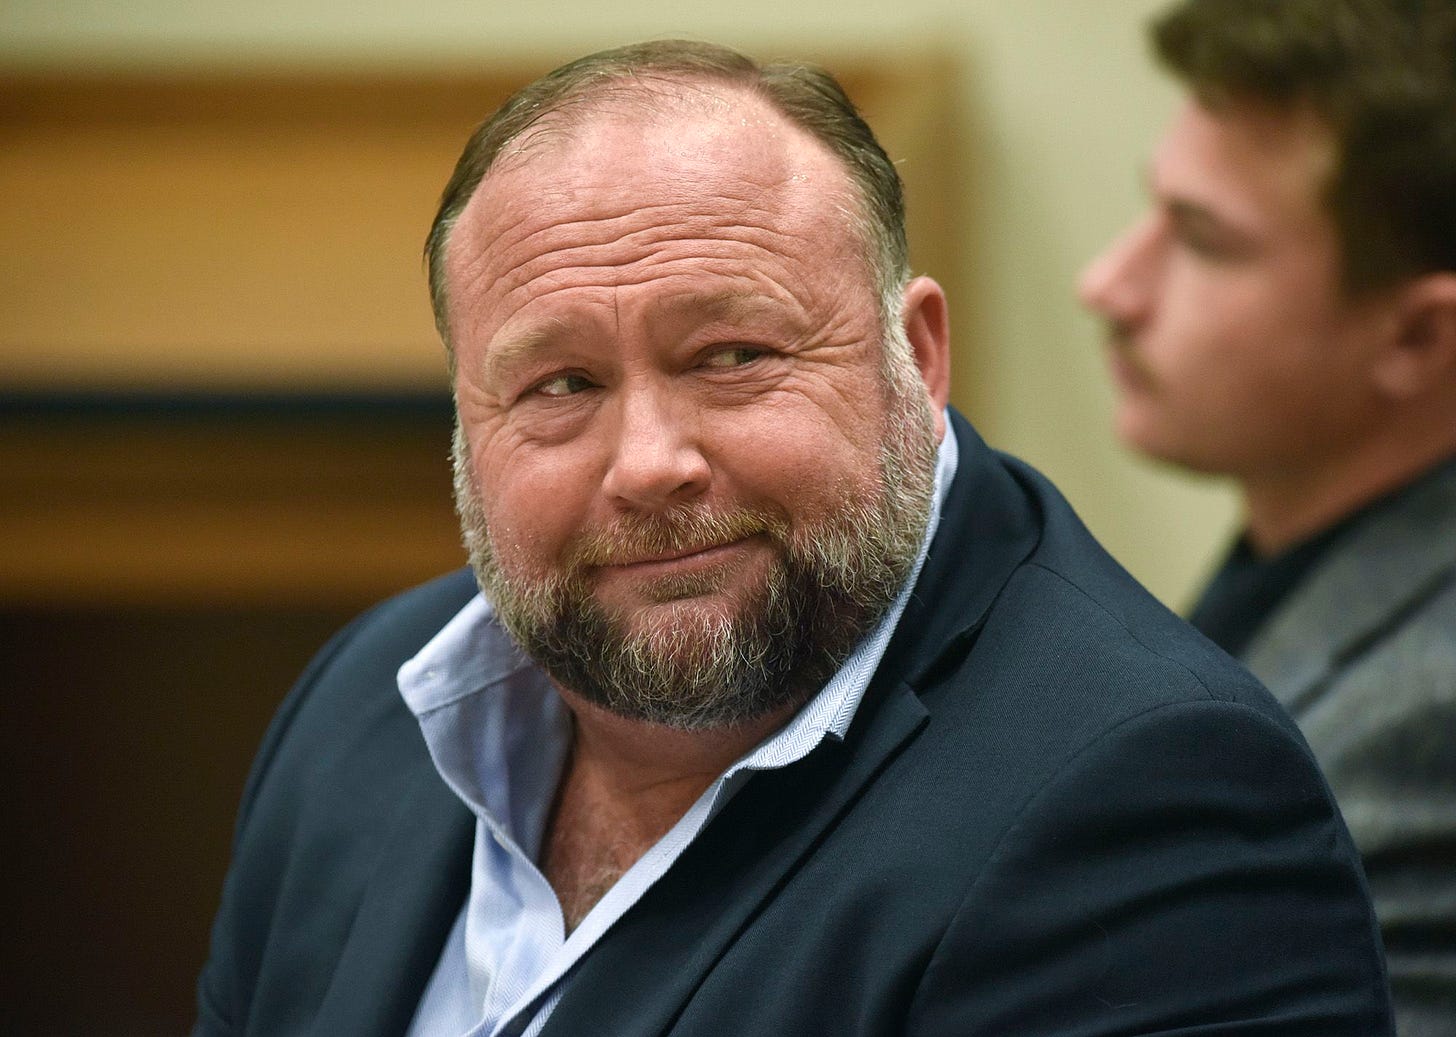 Alex Jones must pay full $45.2 million in damages, Texas judge rules | CNN  Business